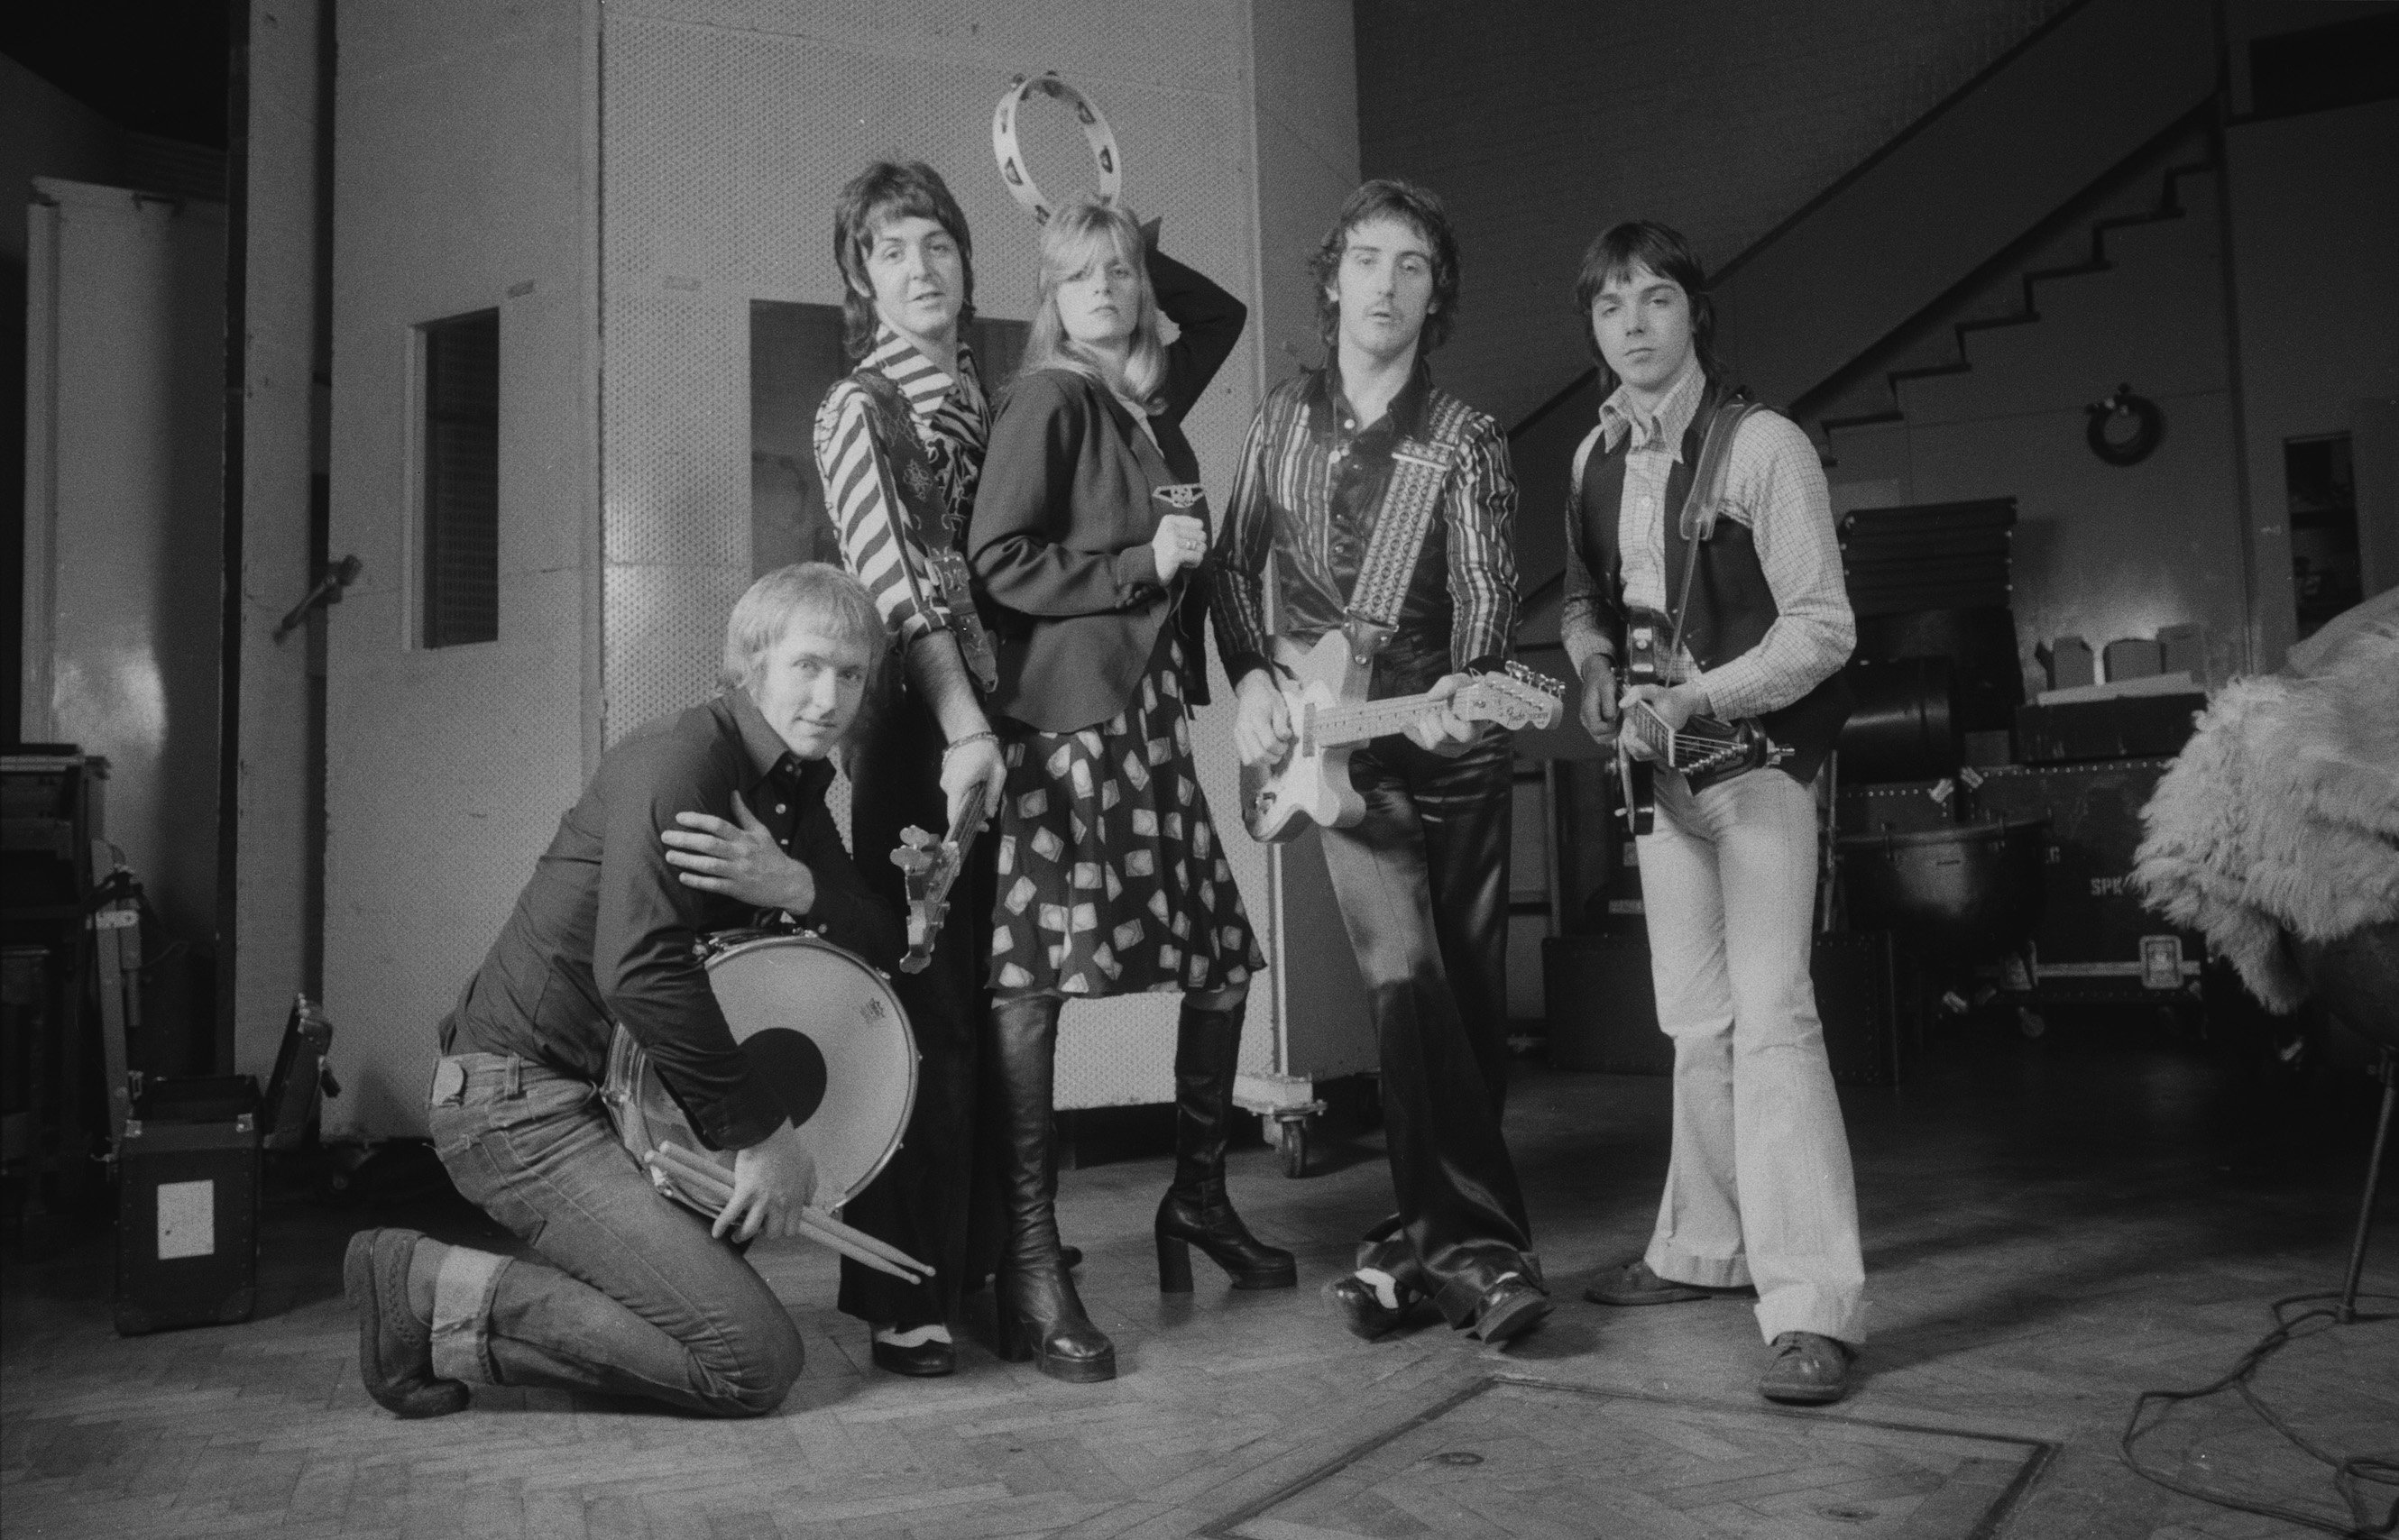 Paul McCartney and the Wings record the album Venus and Mars at Abbey Road Studios